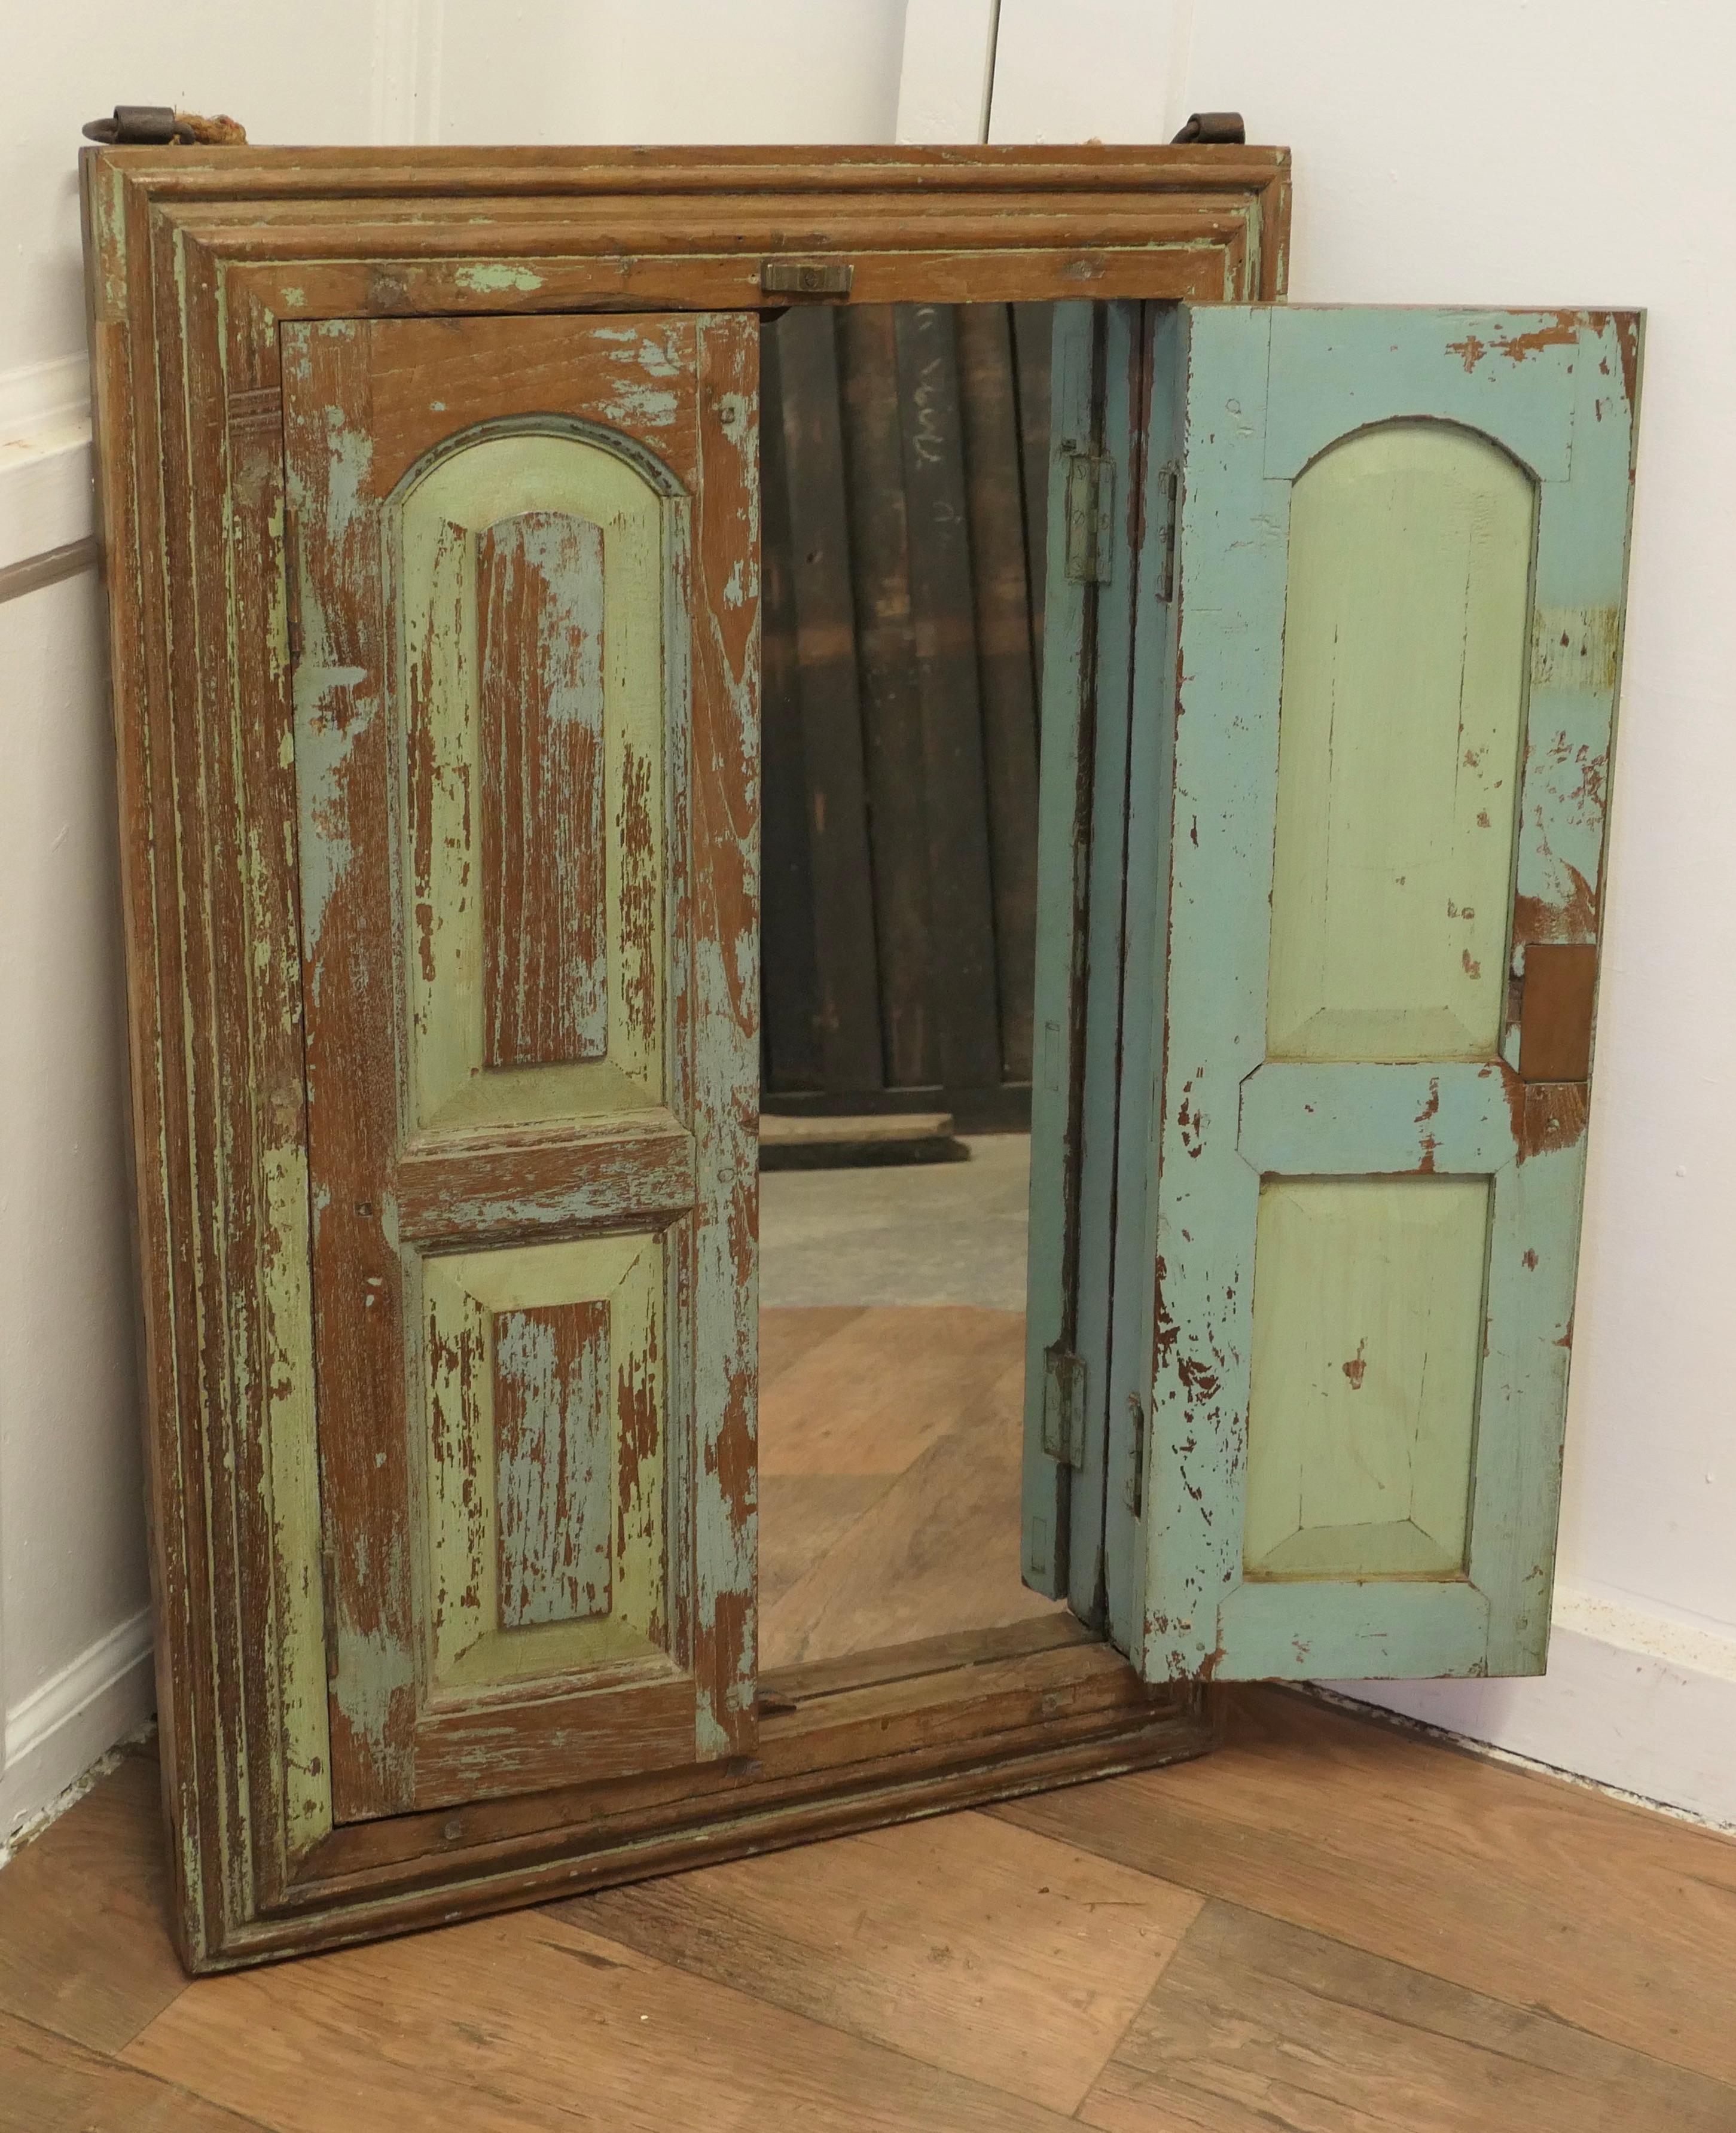 Country Wall Mirror Concealed by Heavy Oak Door Frame/Shutters    For Sale